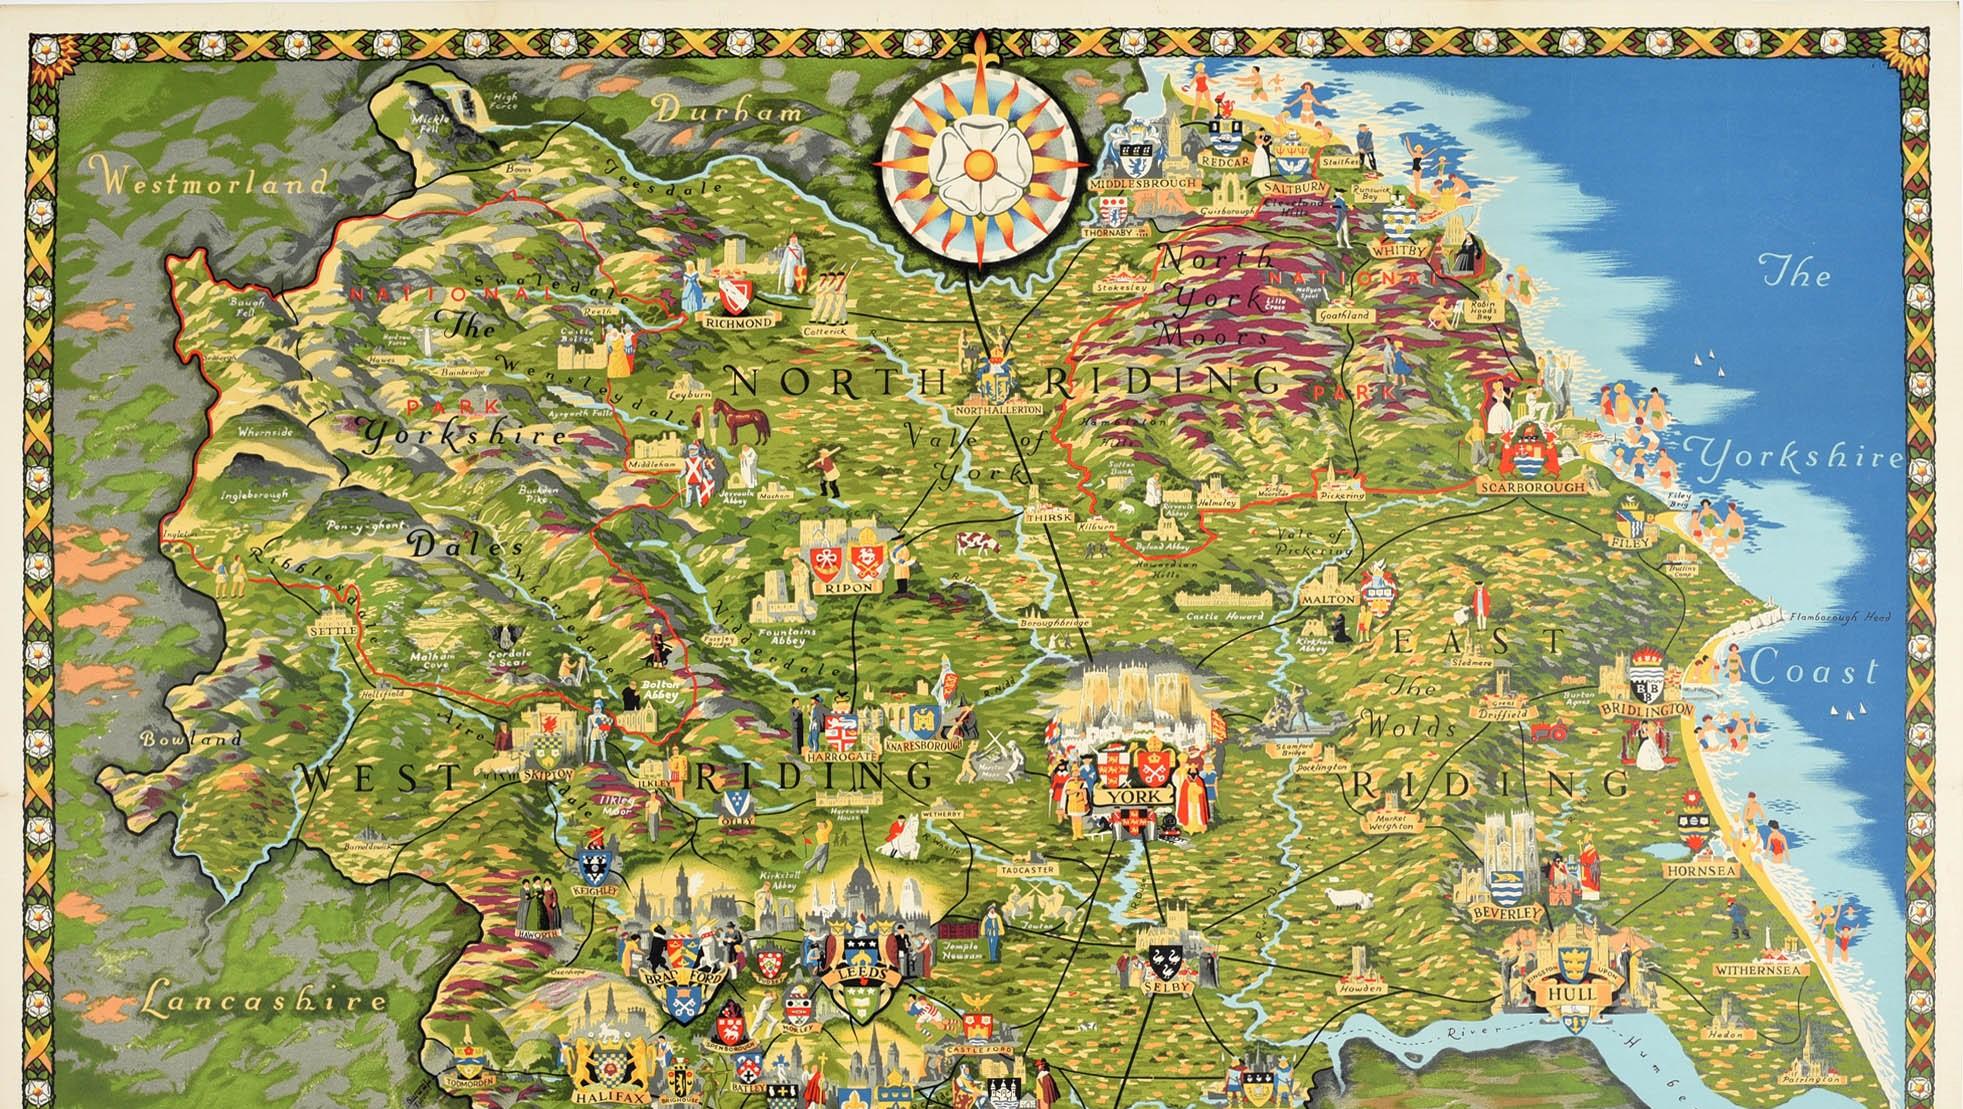 Original vintage train travel poster - Pictorial Map of Yorkshire by British Railways - featuring a colourful and detailed illustrated map of the historic county of Yorkshire in northern England with the coat of arms of the various towns and cities